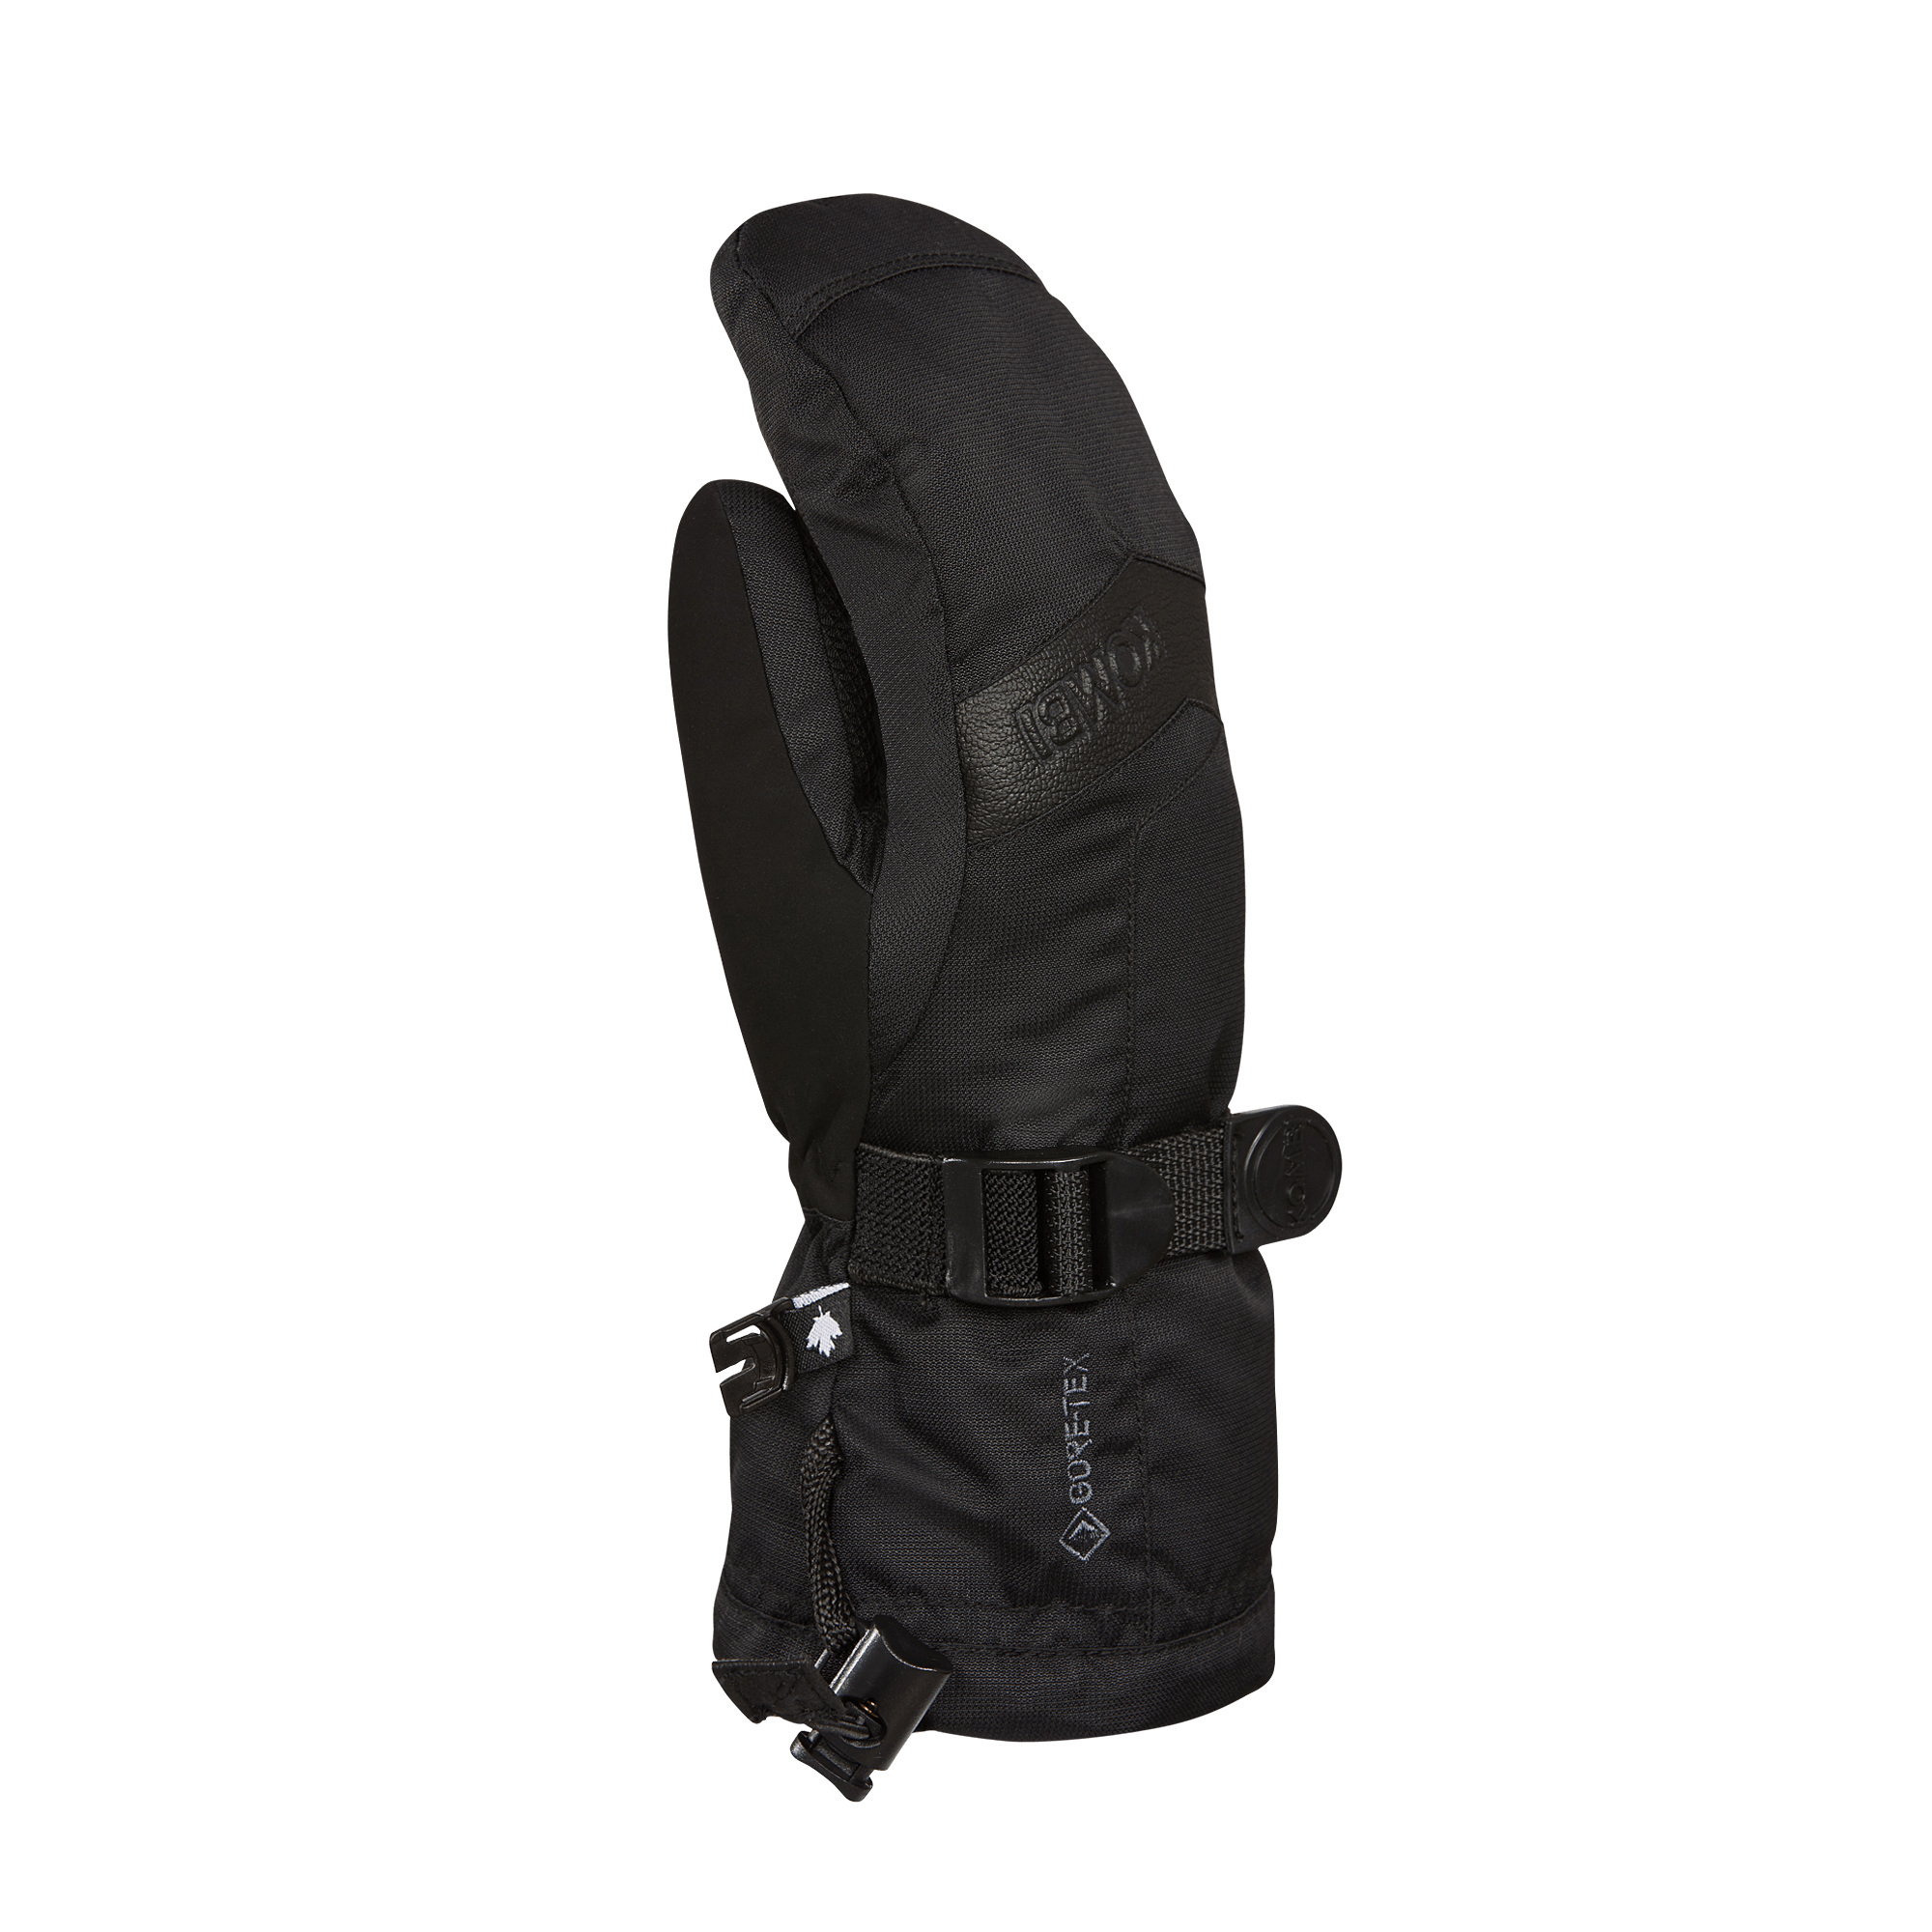 Kombi Zenith Jr Mitts - Mountain Kids Outfitters in Black - Side of the Palm View